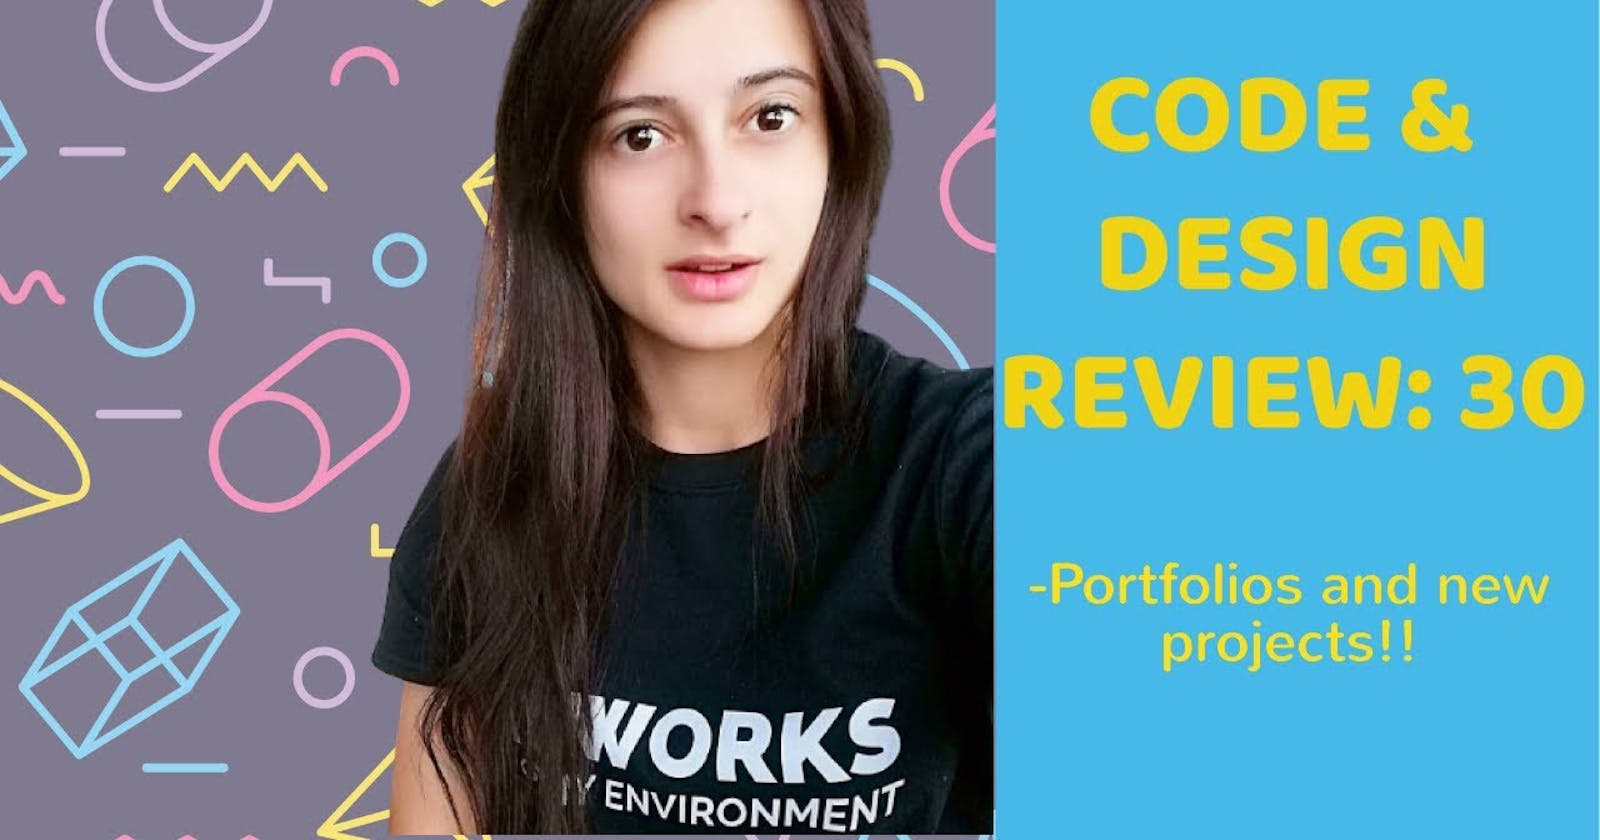 ☘ Review 30: Portfolios and cool projects!! | #elefDoesCode